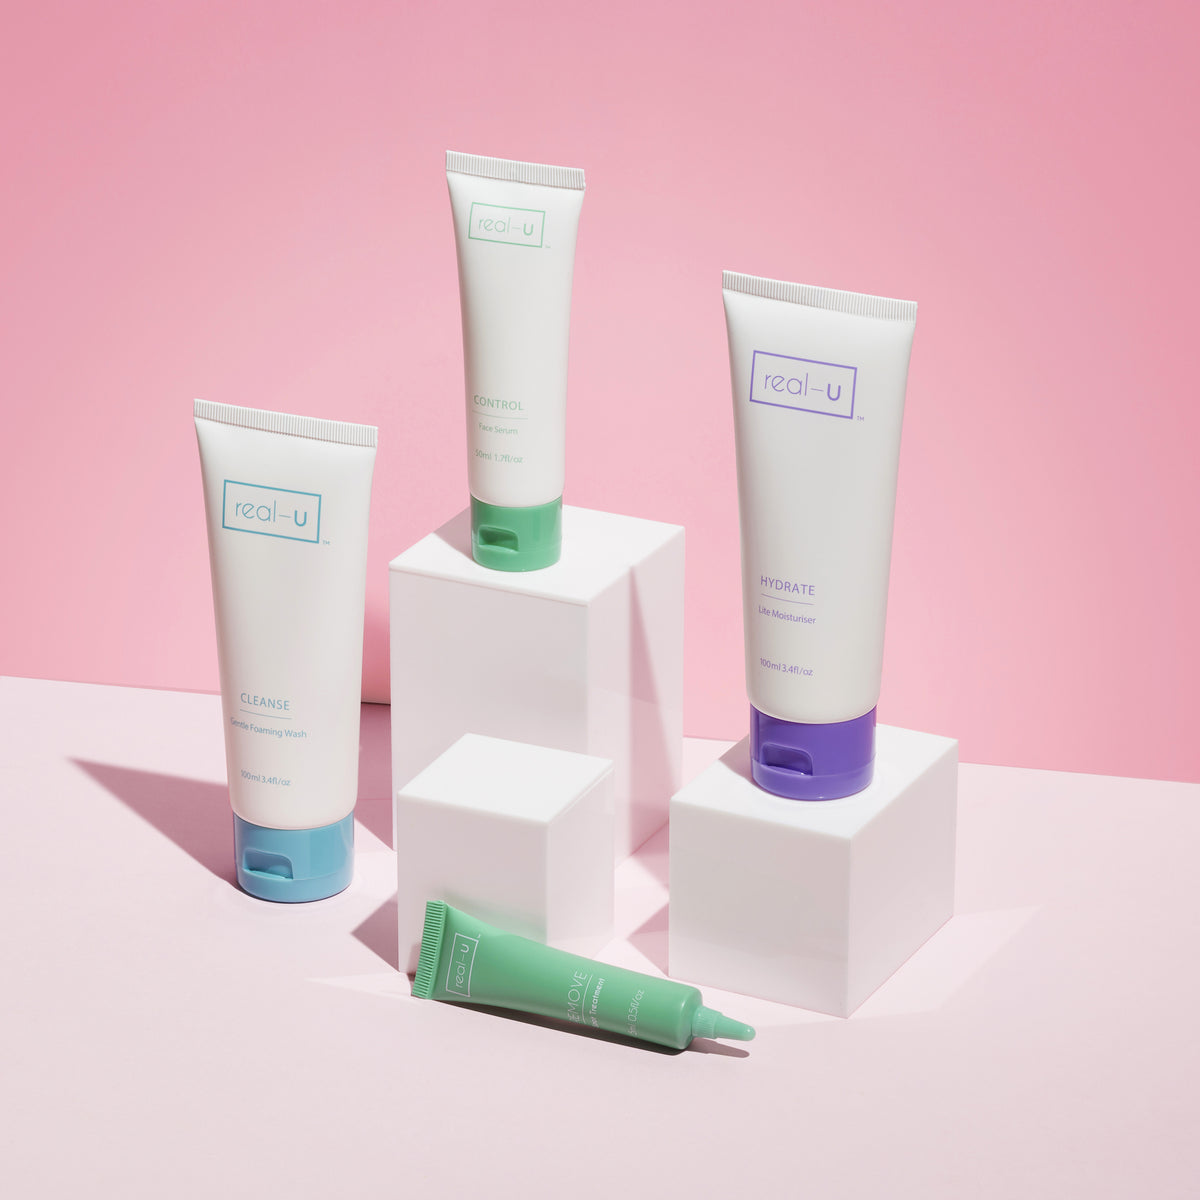 The real-u Luxe Kit contains everything you need to clear acne and pimples fast